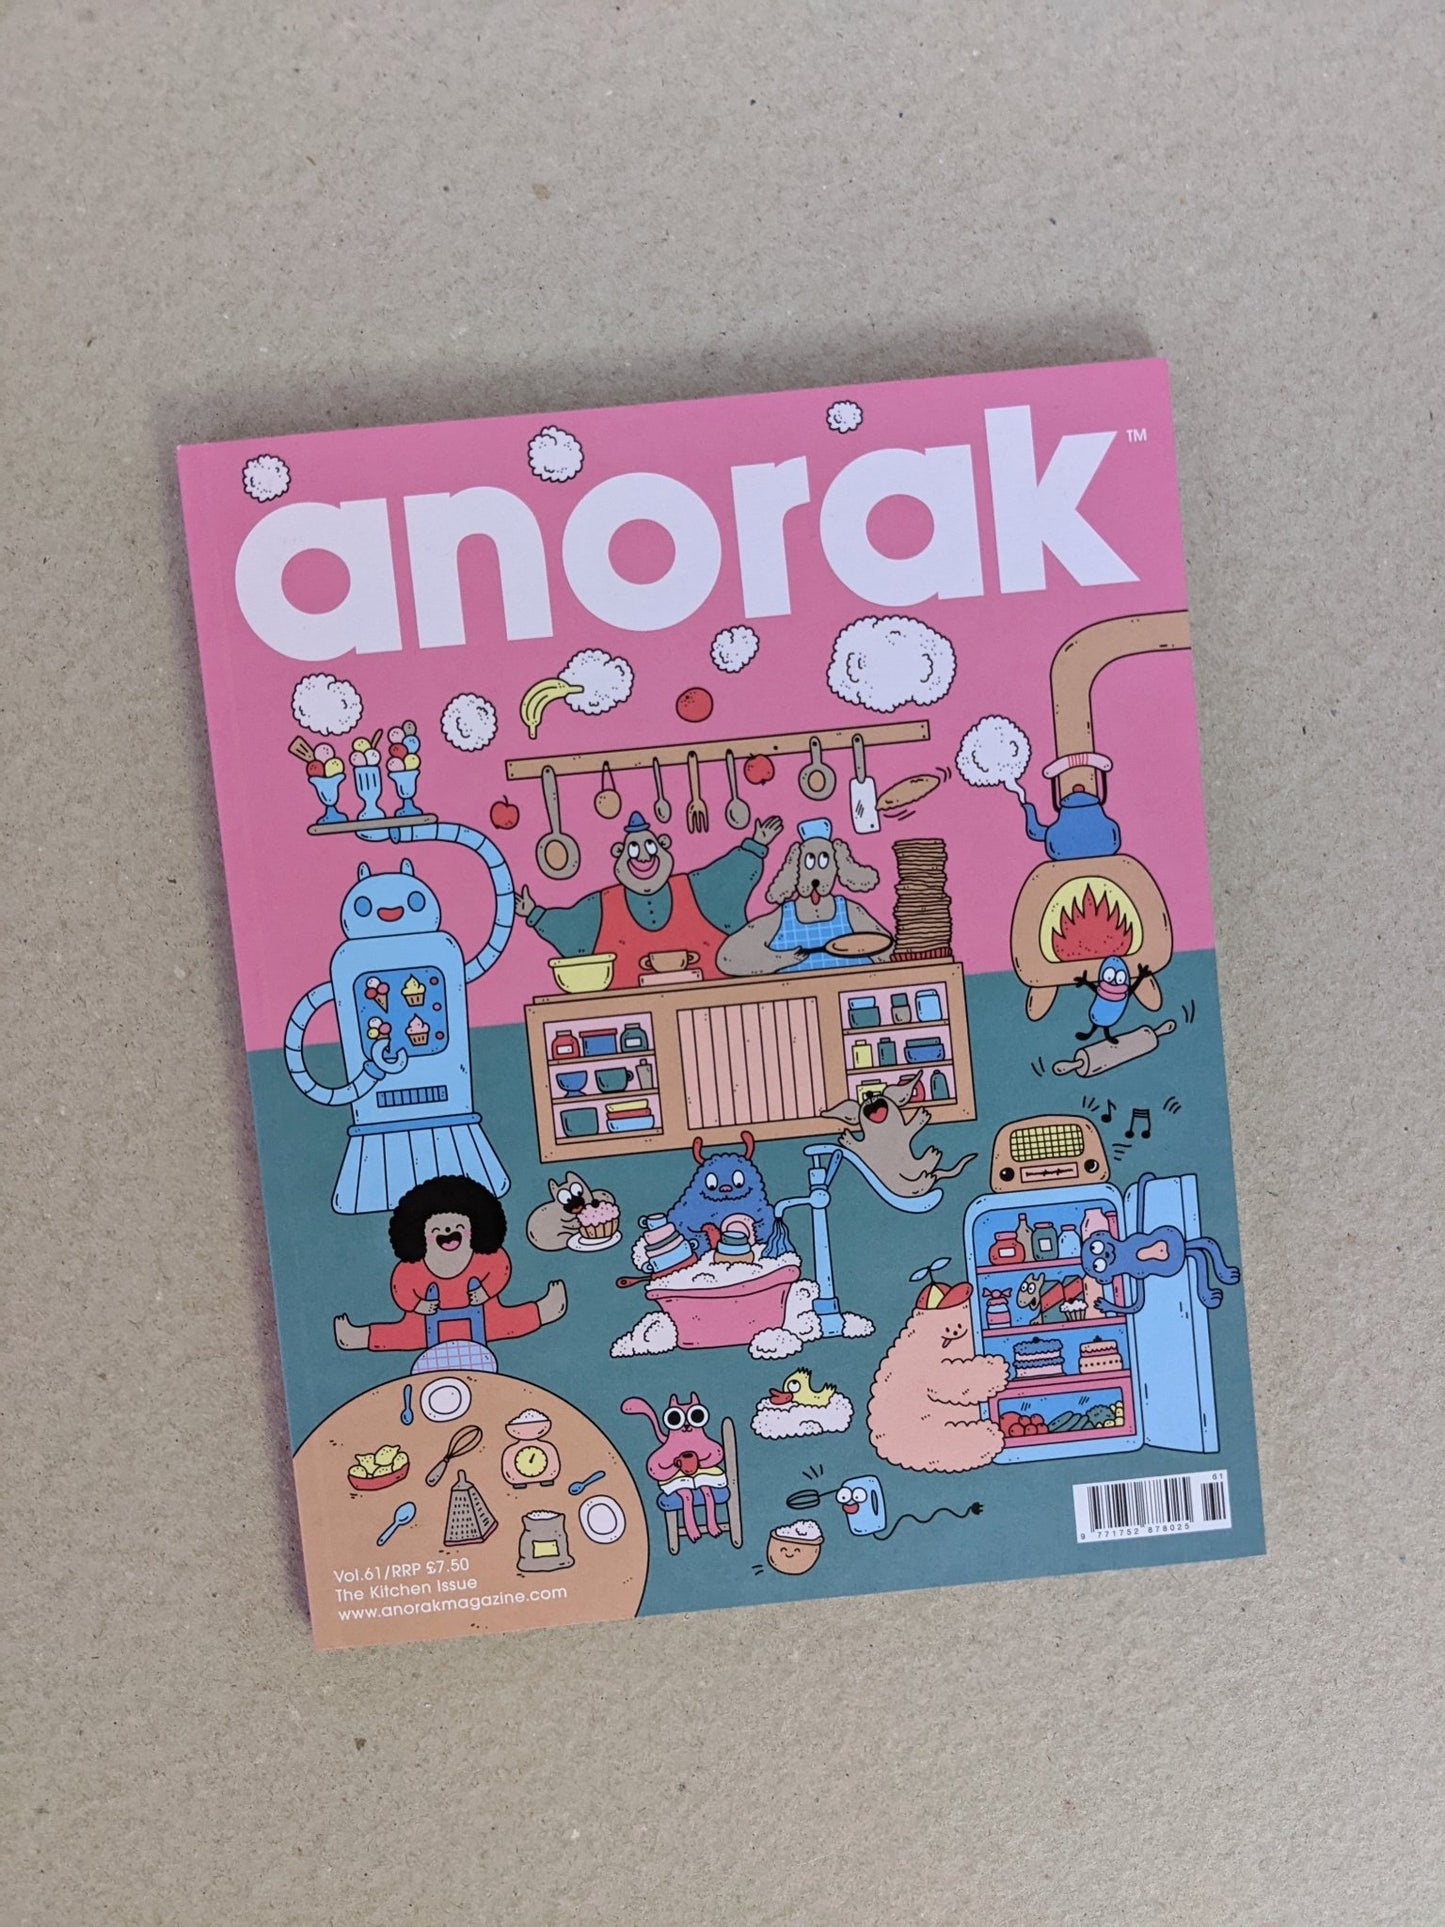 Anorak - Vol 61 - The Stationery Cupboard